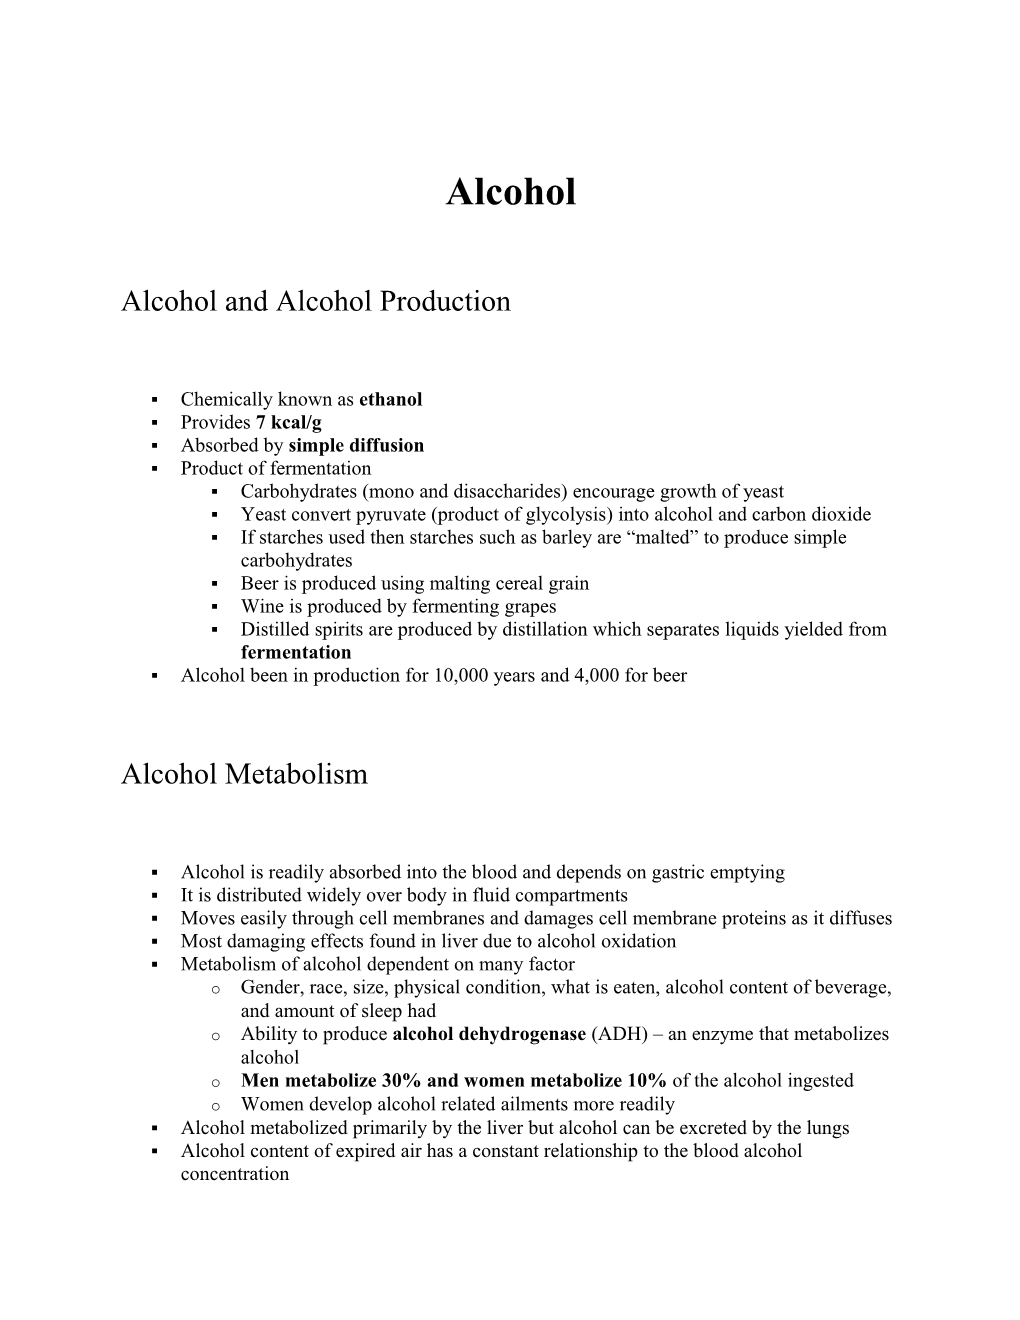 Alcohol and Alcohol Production